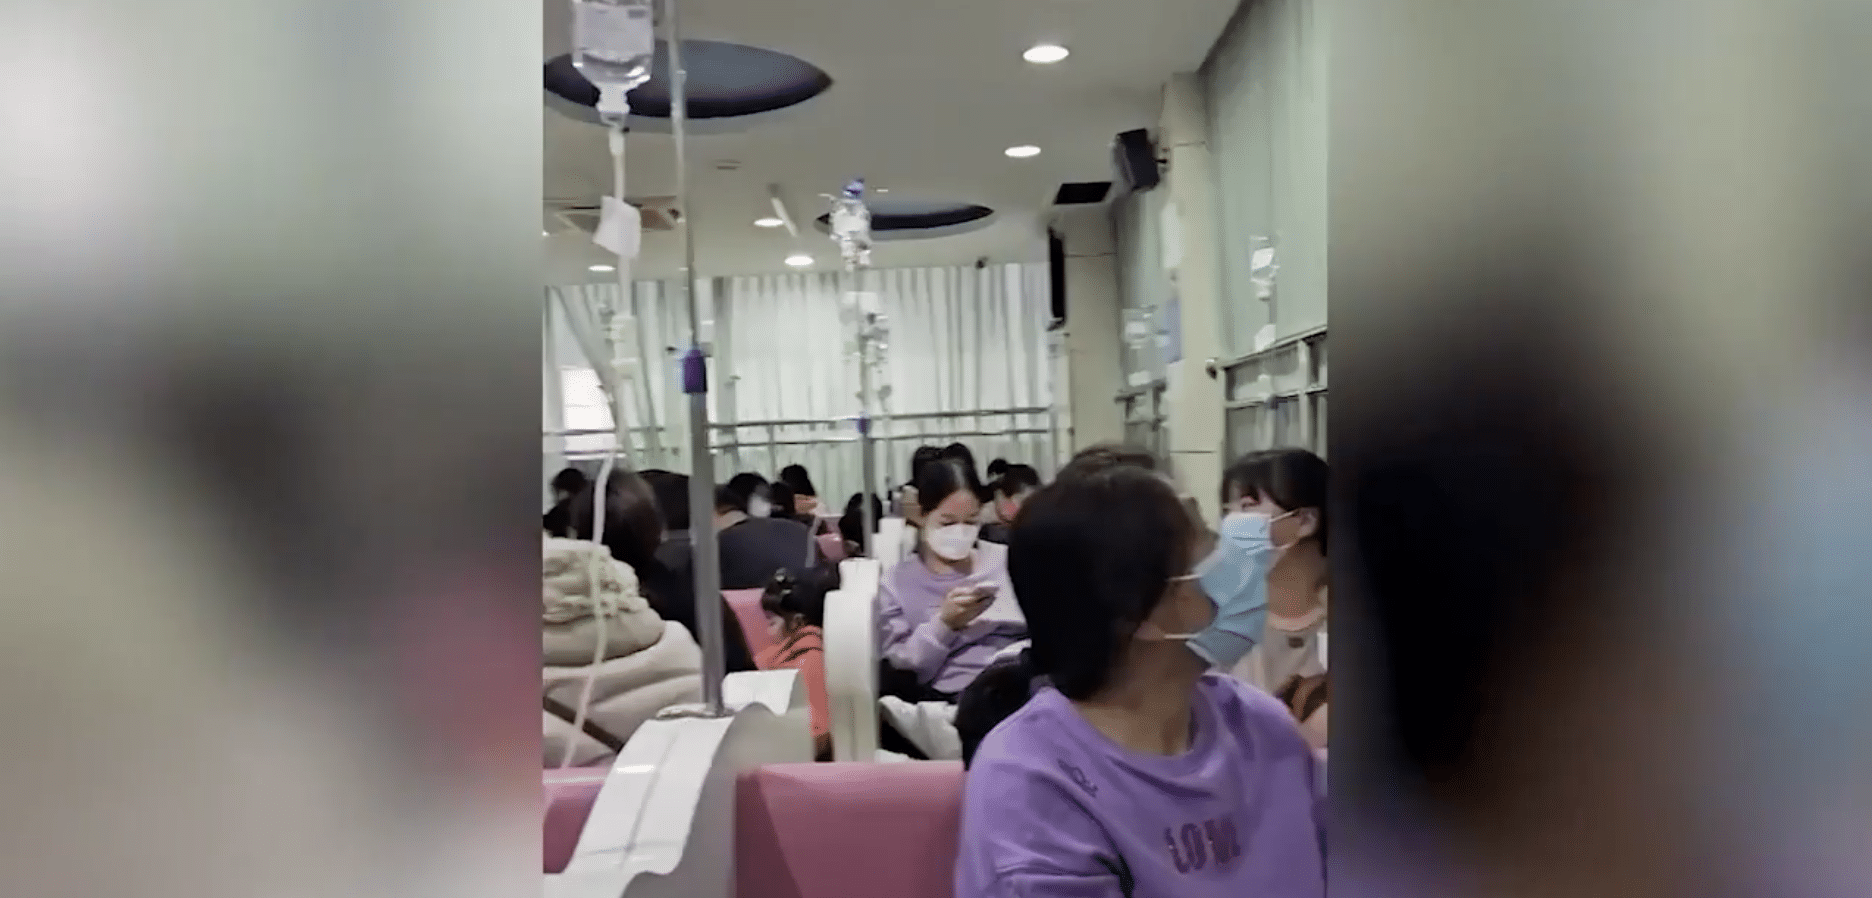 UPDATE: Desperate parents seen clutching children hooked to IVs on hospital floors as China’s mystery ‘pneumonia’ outbreak worsens